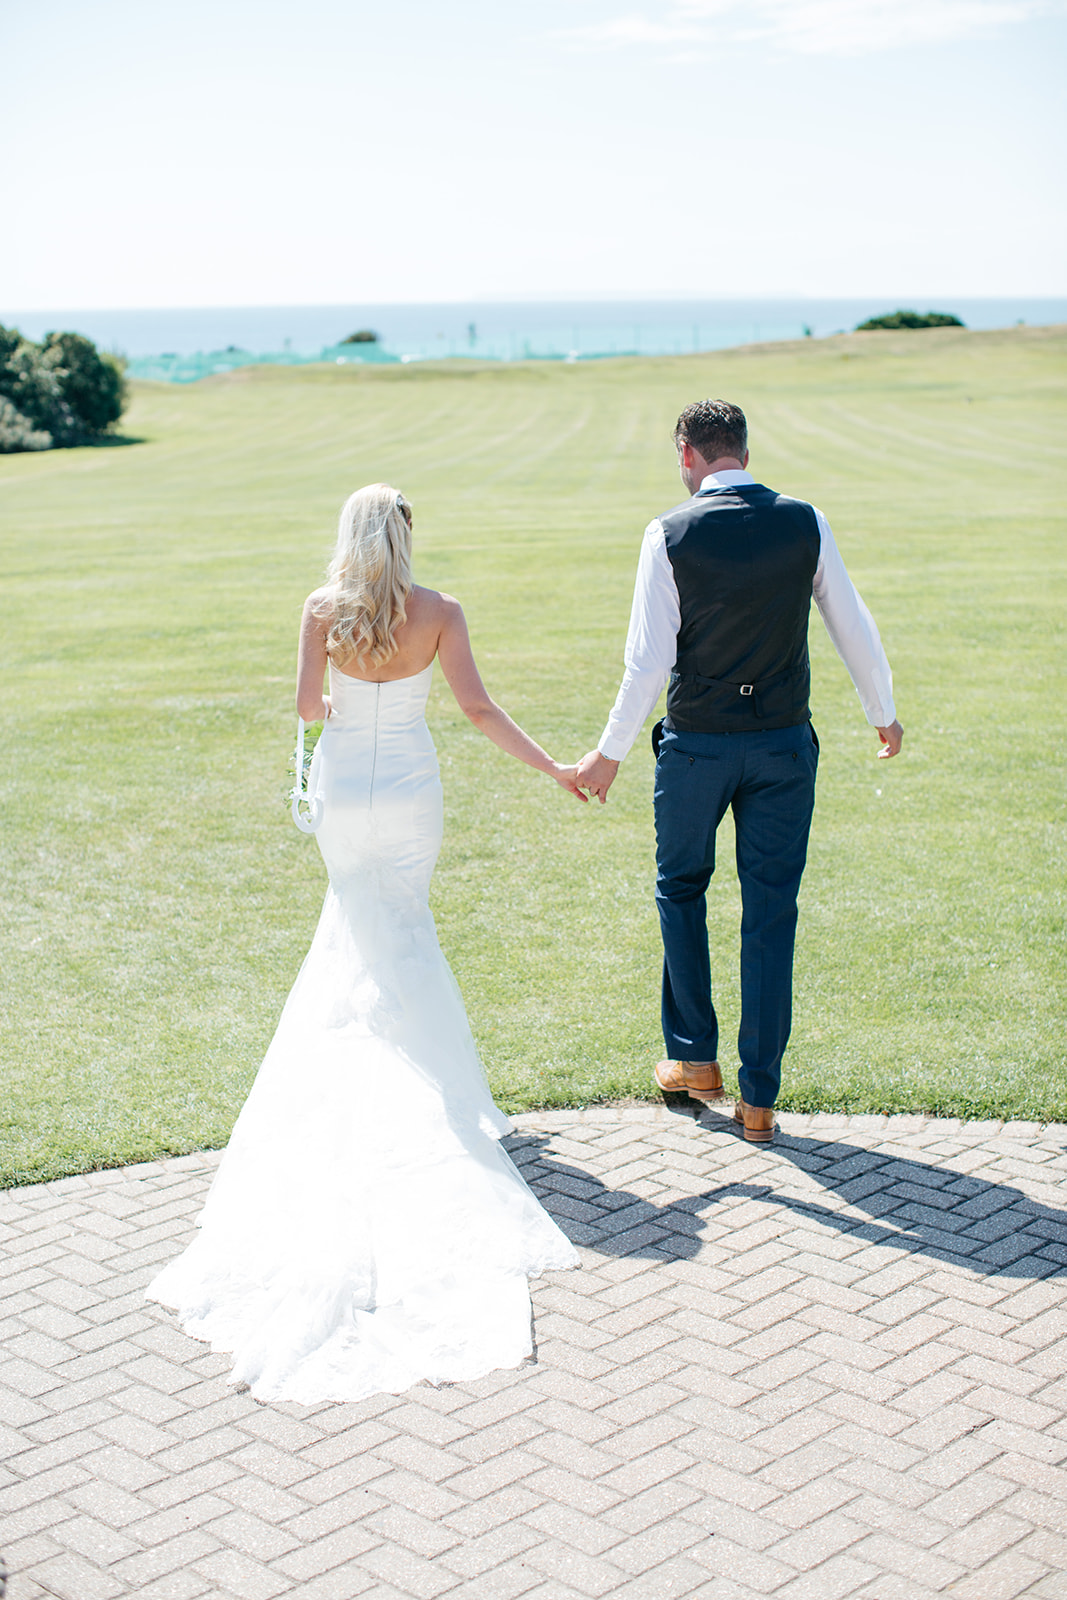 Intimate Elopement Wedding Photography at Woolacombe Bay Hotel in North Devon